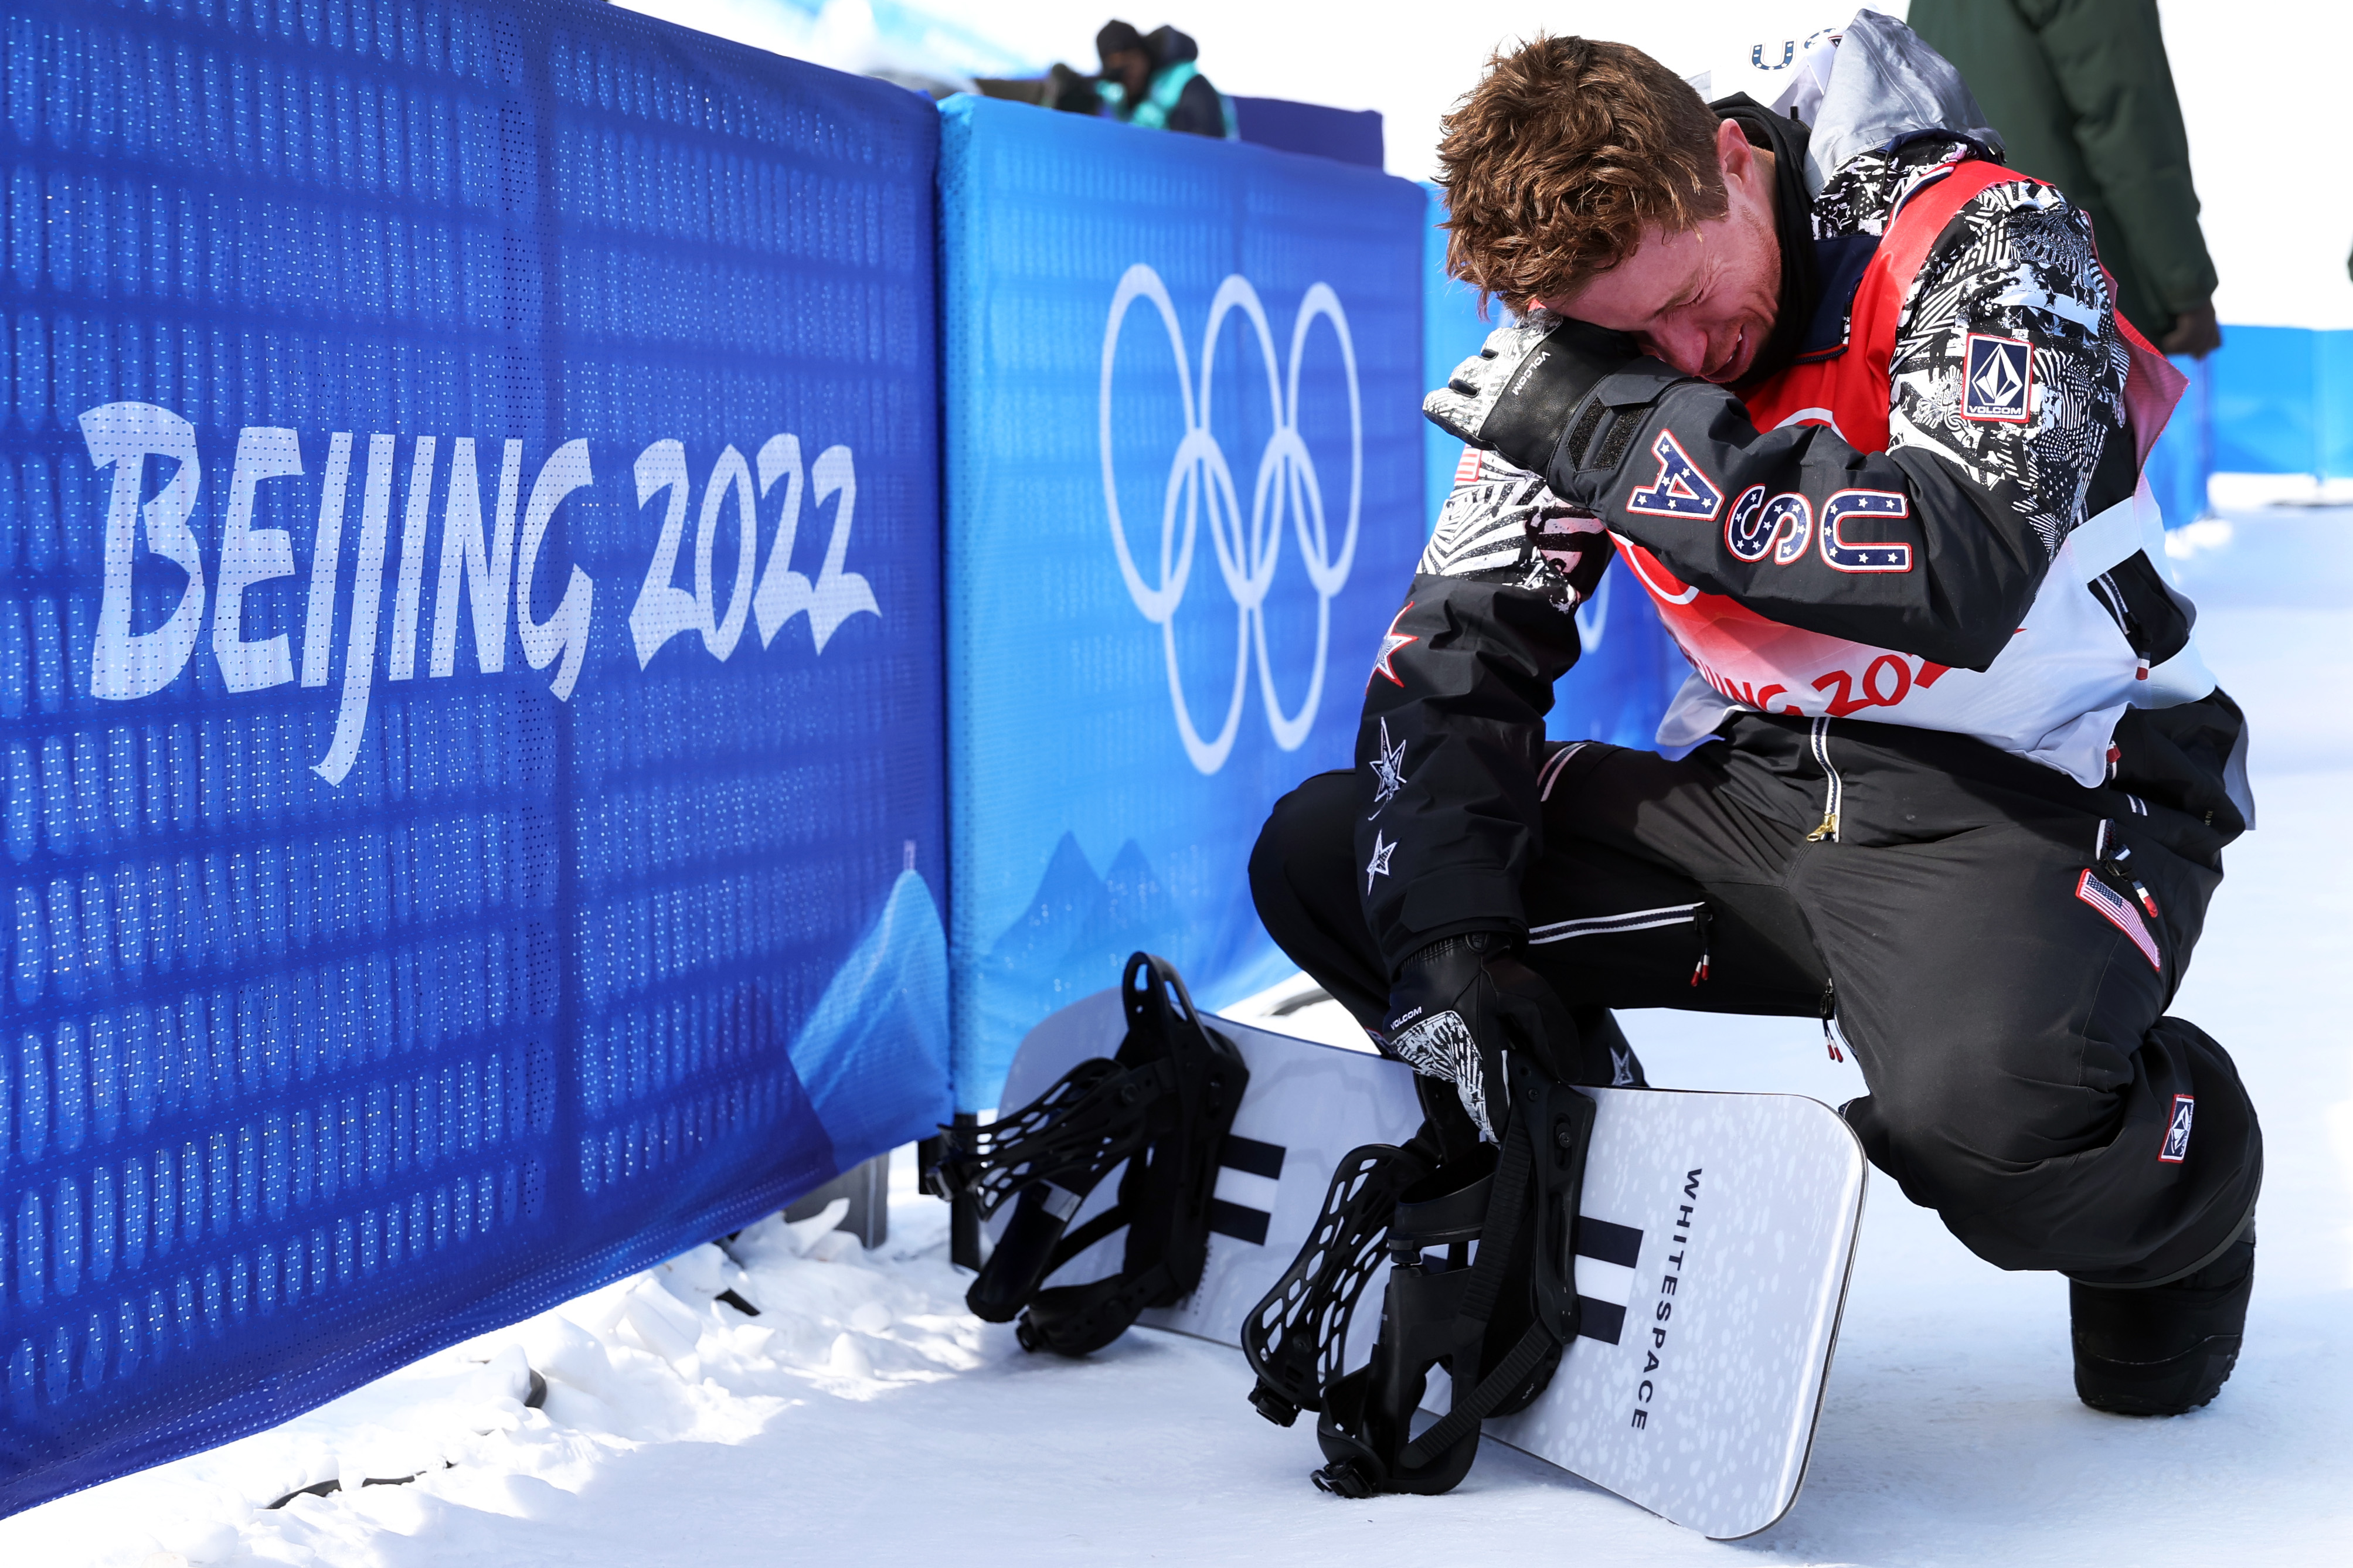 Shaun White becomes emotional after finishing fourth during the Men's Snowboard Halfpipe